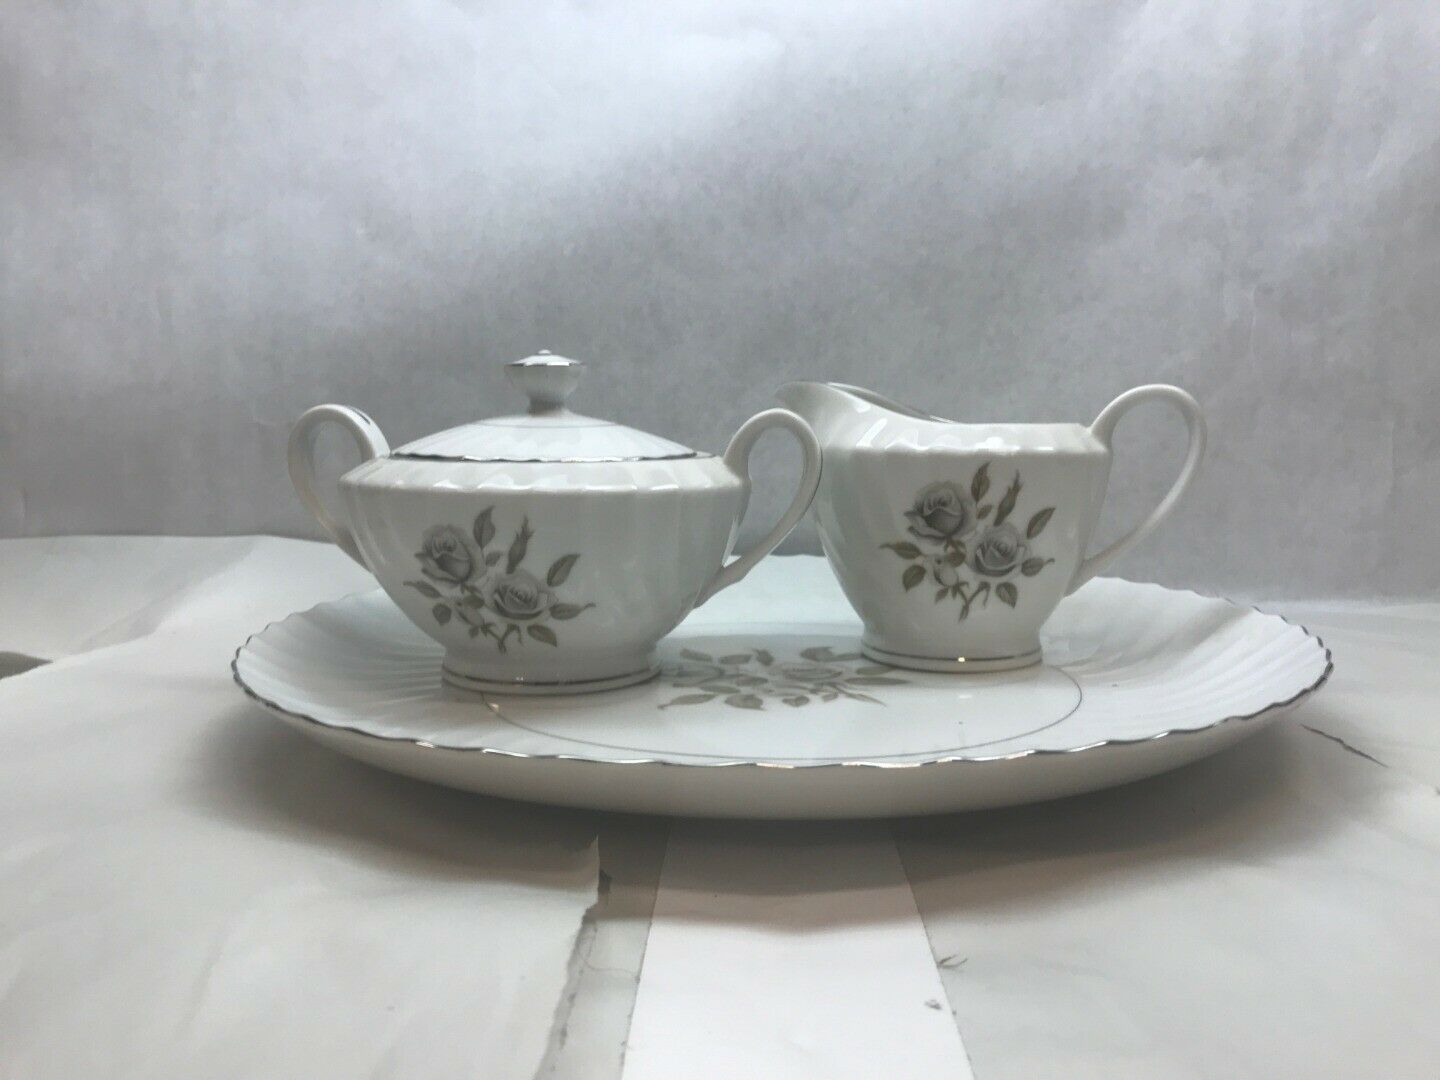 Primary image for Vintage SET of WAVERLY JAPAN Sugar, CREAMER, Platter White with Beige Flowers